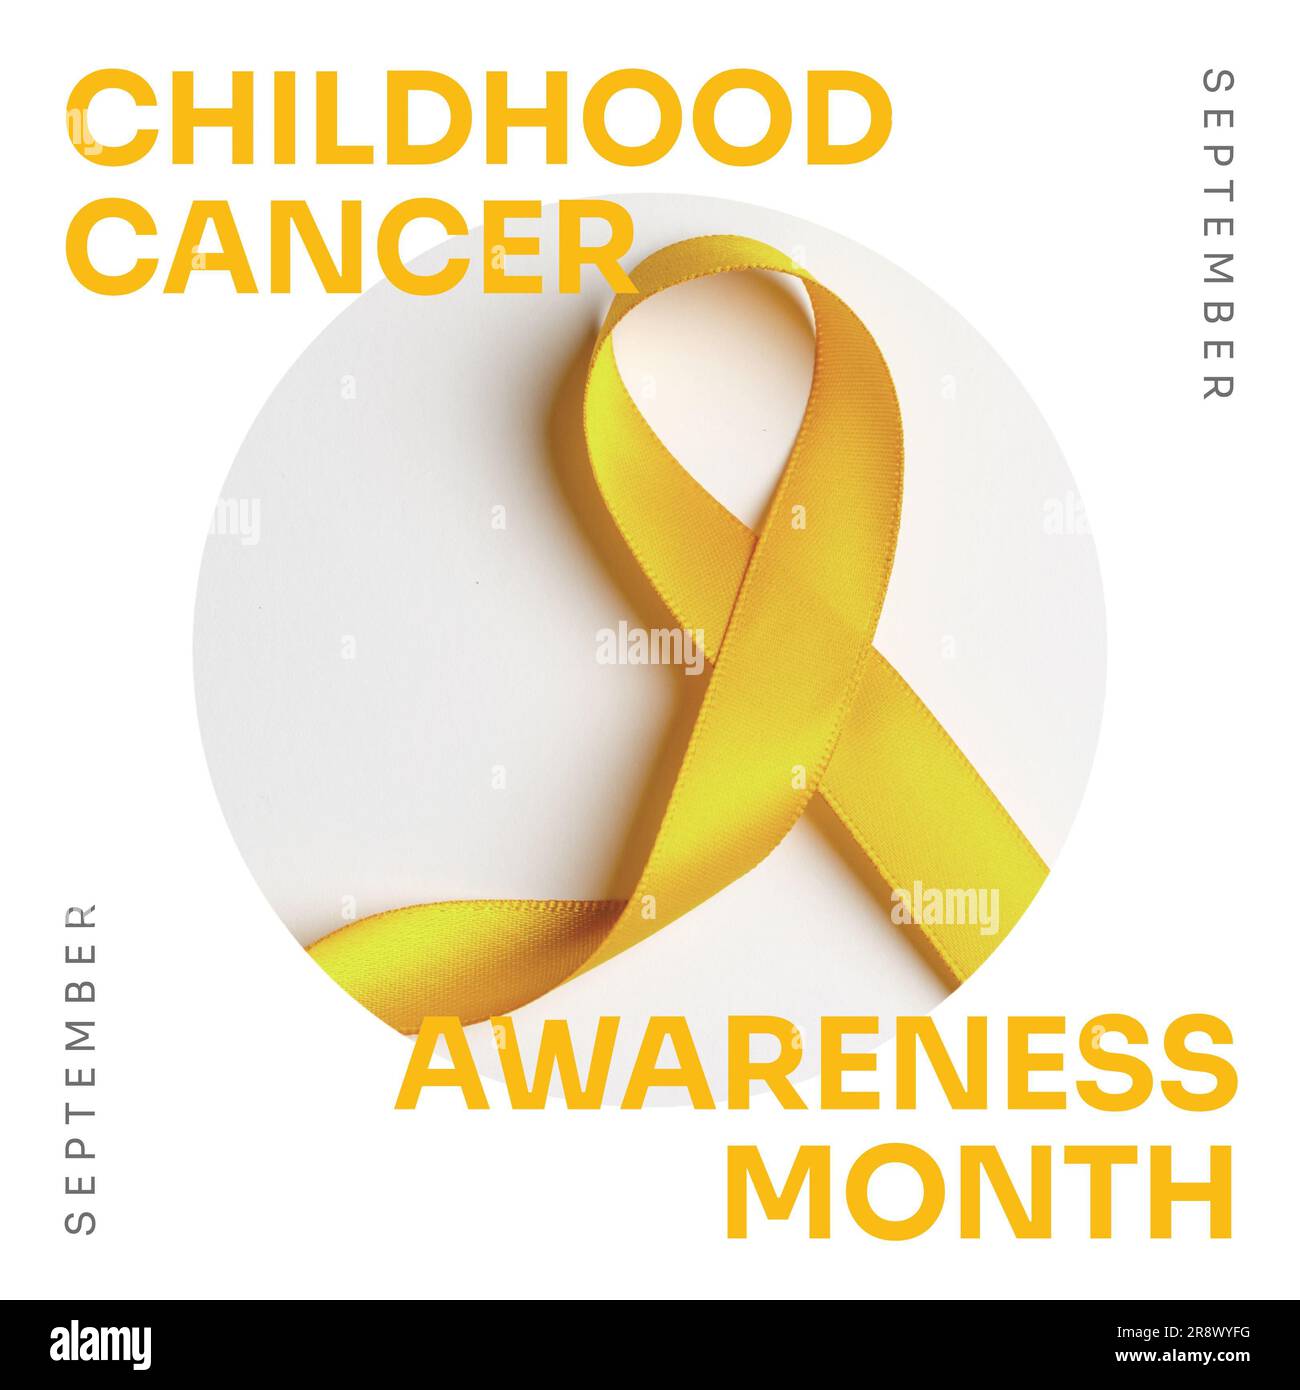 Childhood cancer awareness month text in yellow and yellow cancer ribbon on white background Stock Photo